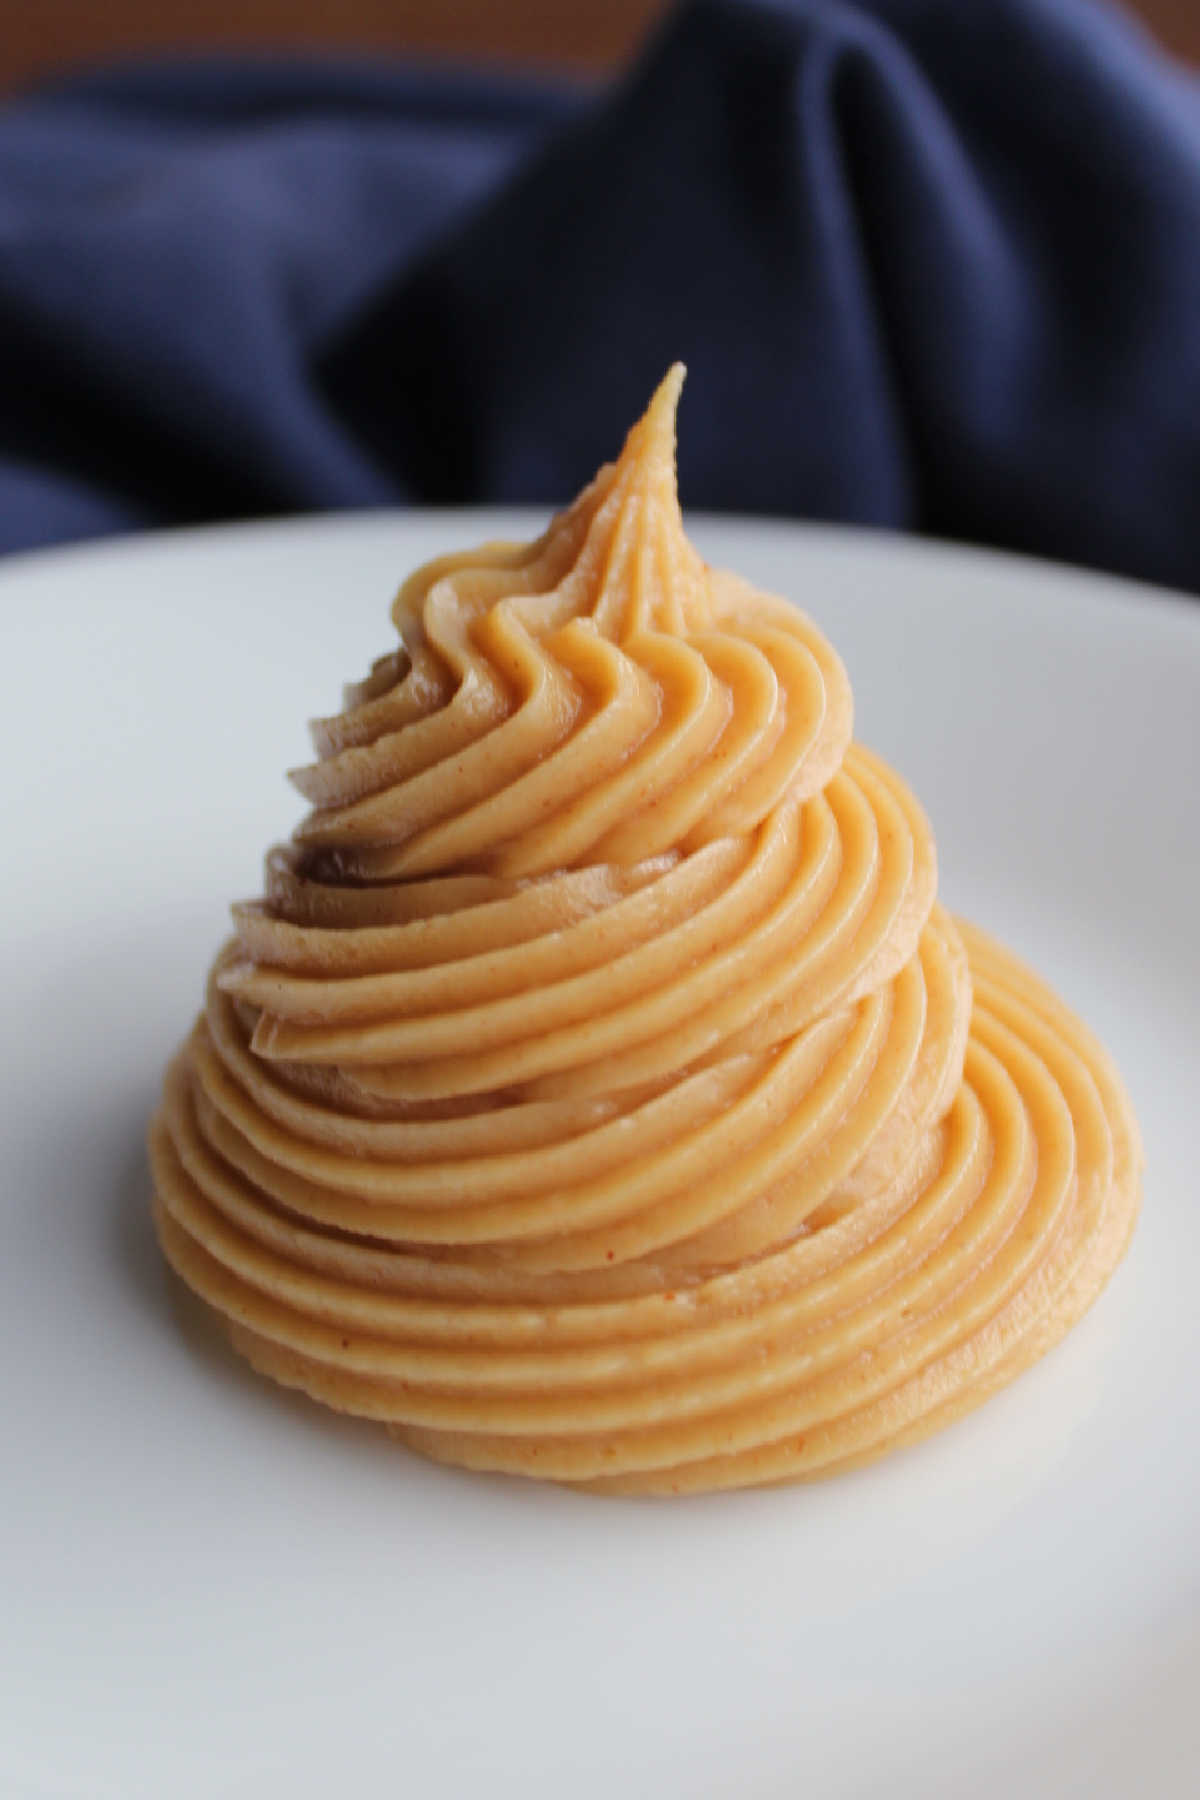 Piped swirl of peanut butter cream cheese frosting.